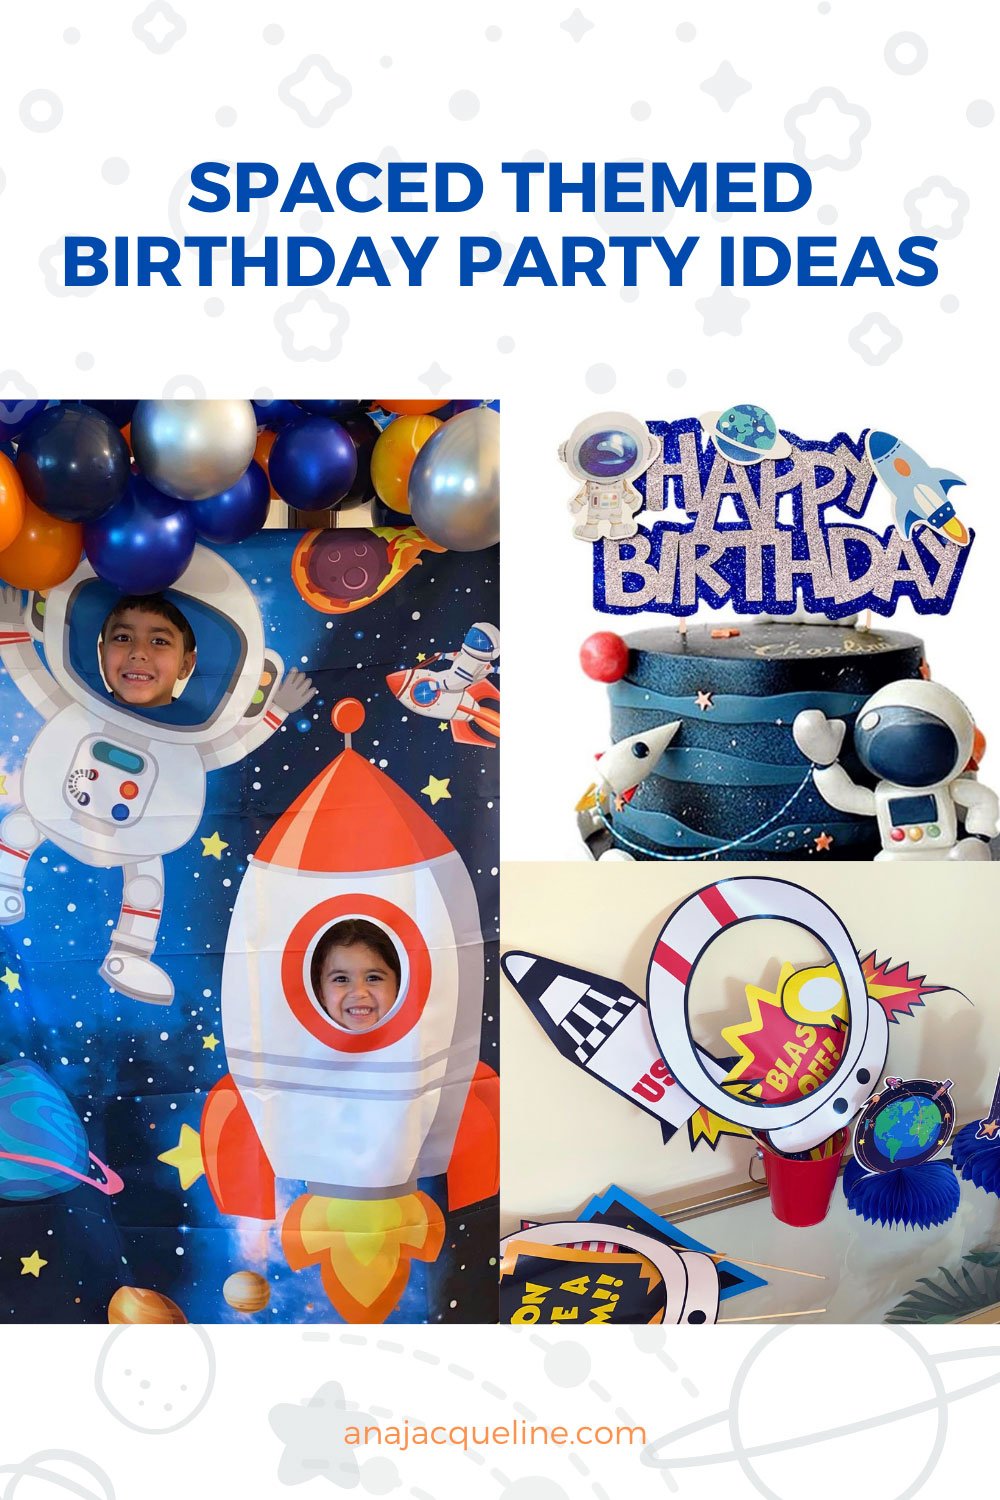 Achilles' Out Of This World 6th Birthday Party! — Ana Jacqueline - Latina Mom. Motherhood, Fitness, Travel... Life